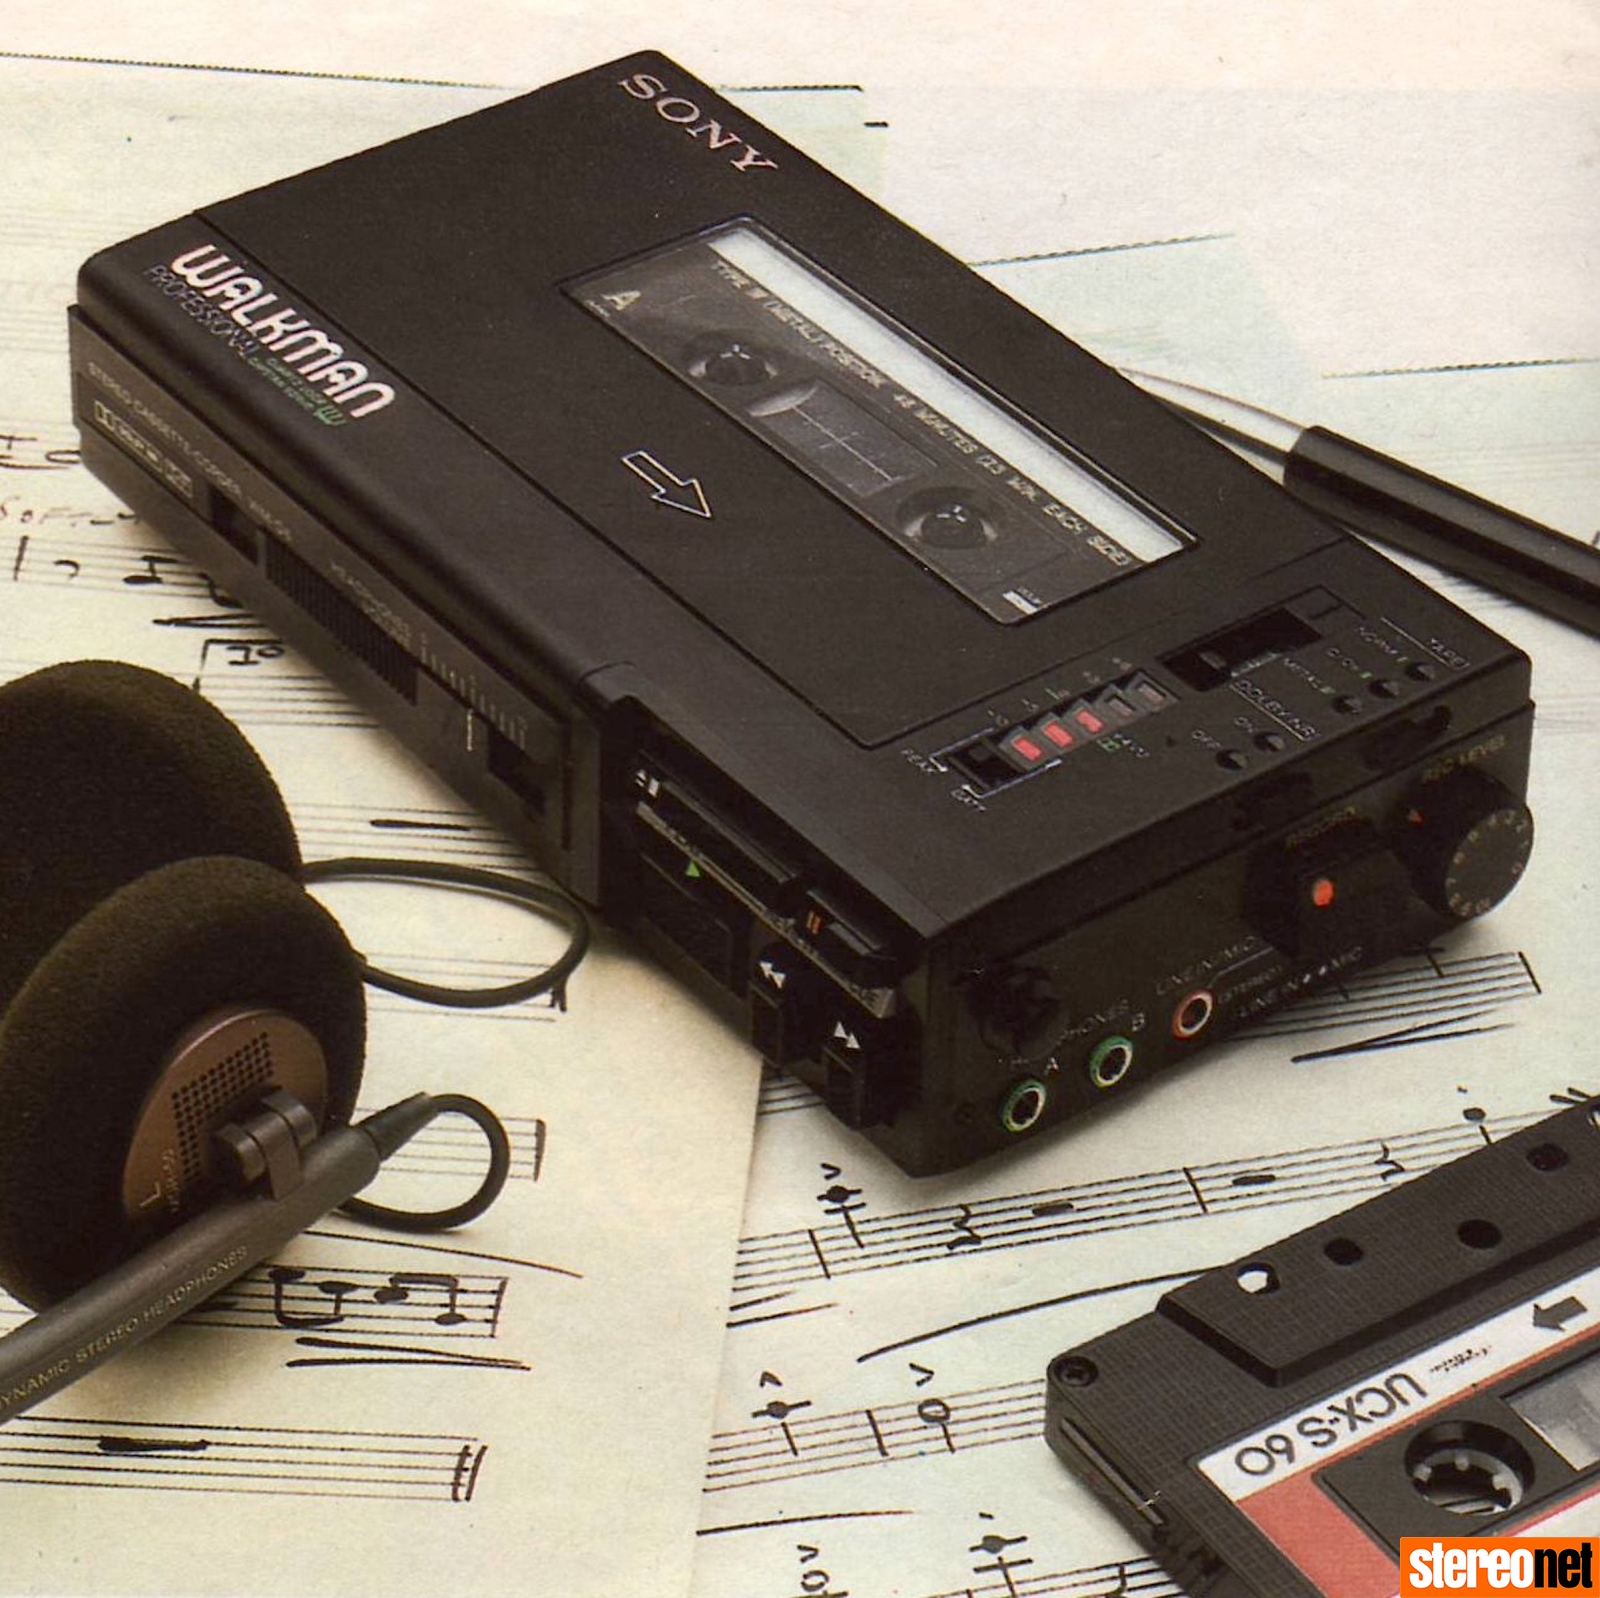 SONY WM-D6C - the definitive guide of this iconic portable tape